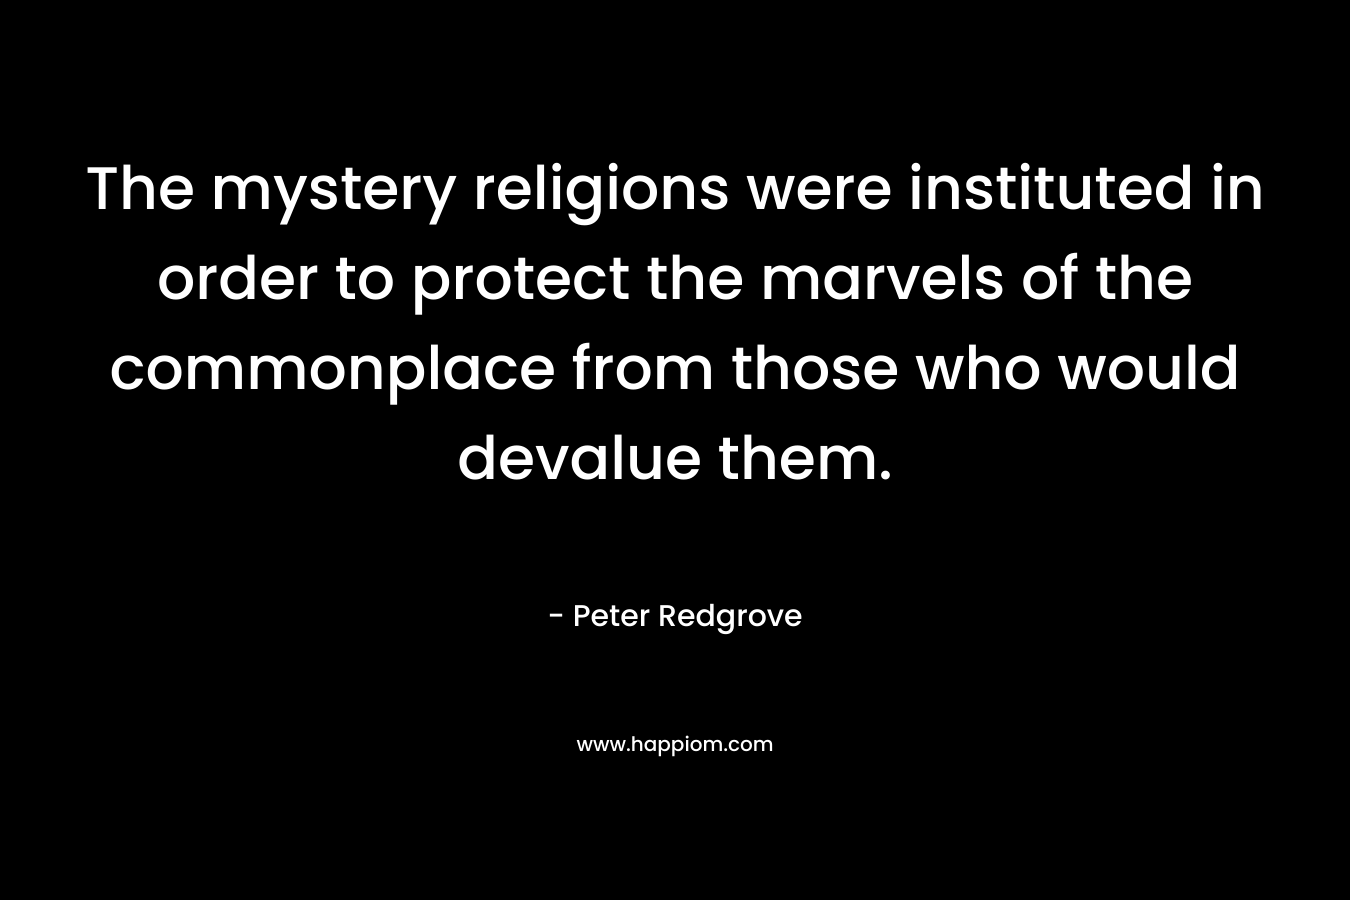 The mystery religions were instituted in order to protect the marvels of the commonplace from those who would devalue them. – Peter Redgrove